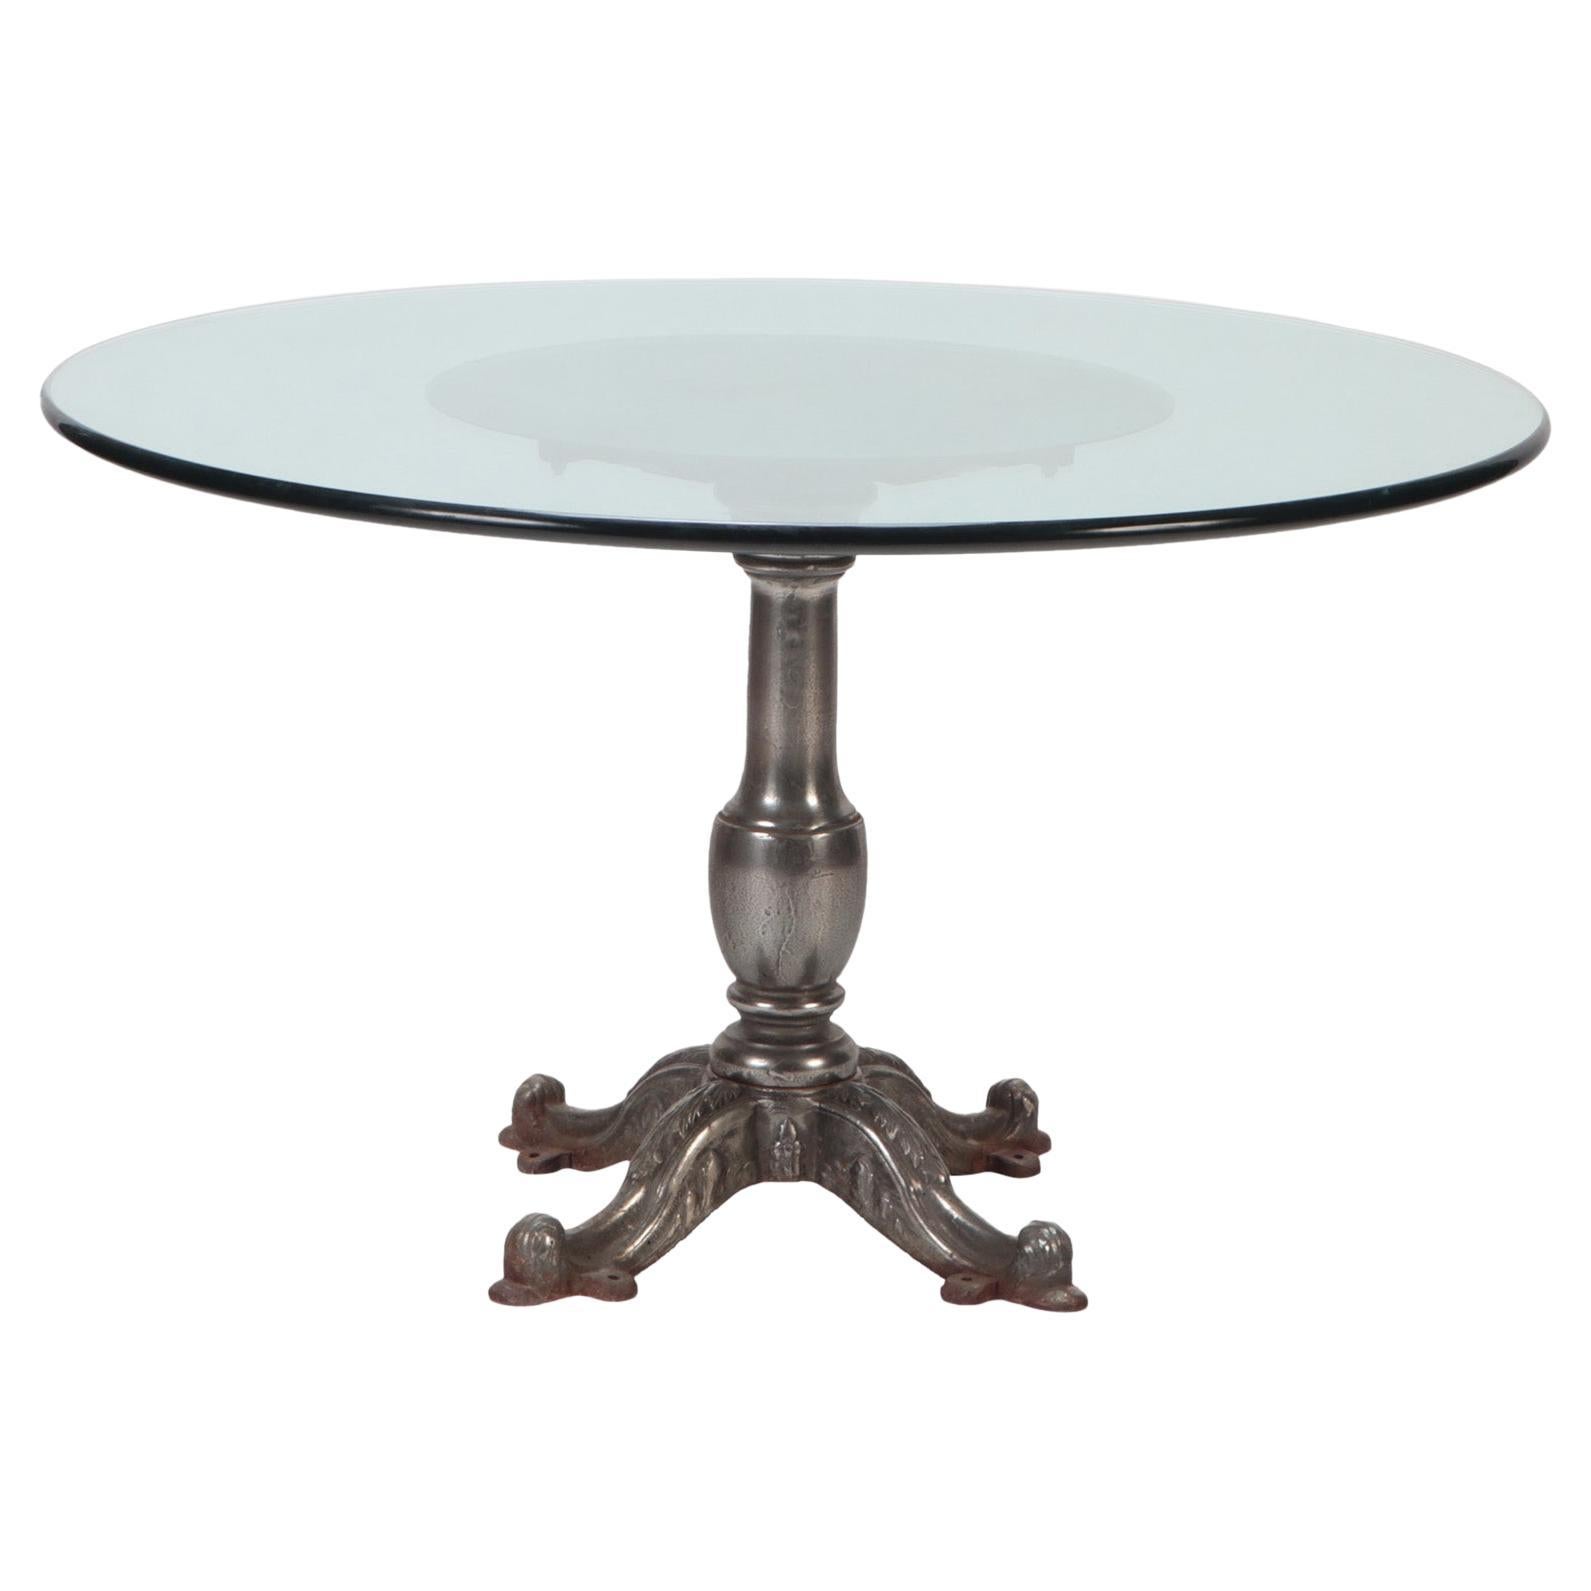 Heavy Cast Iron Table with Round Glass Top